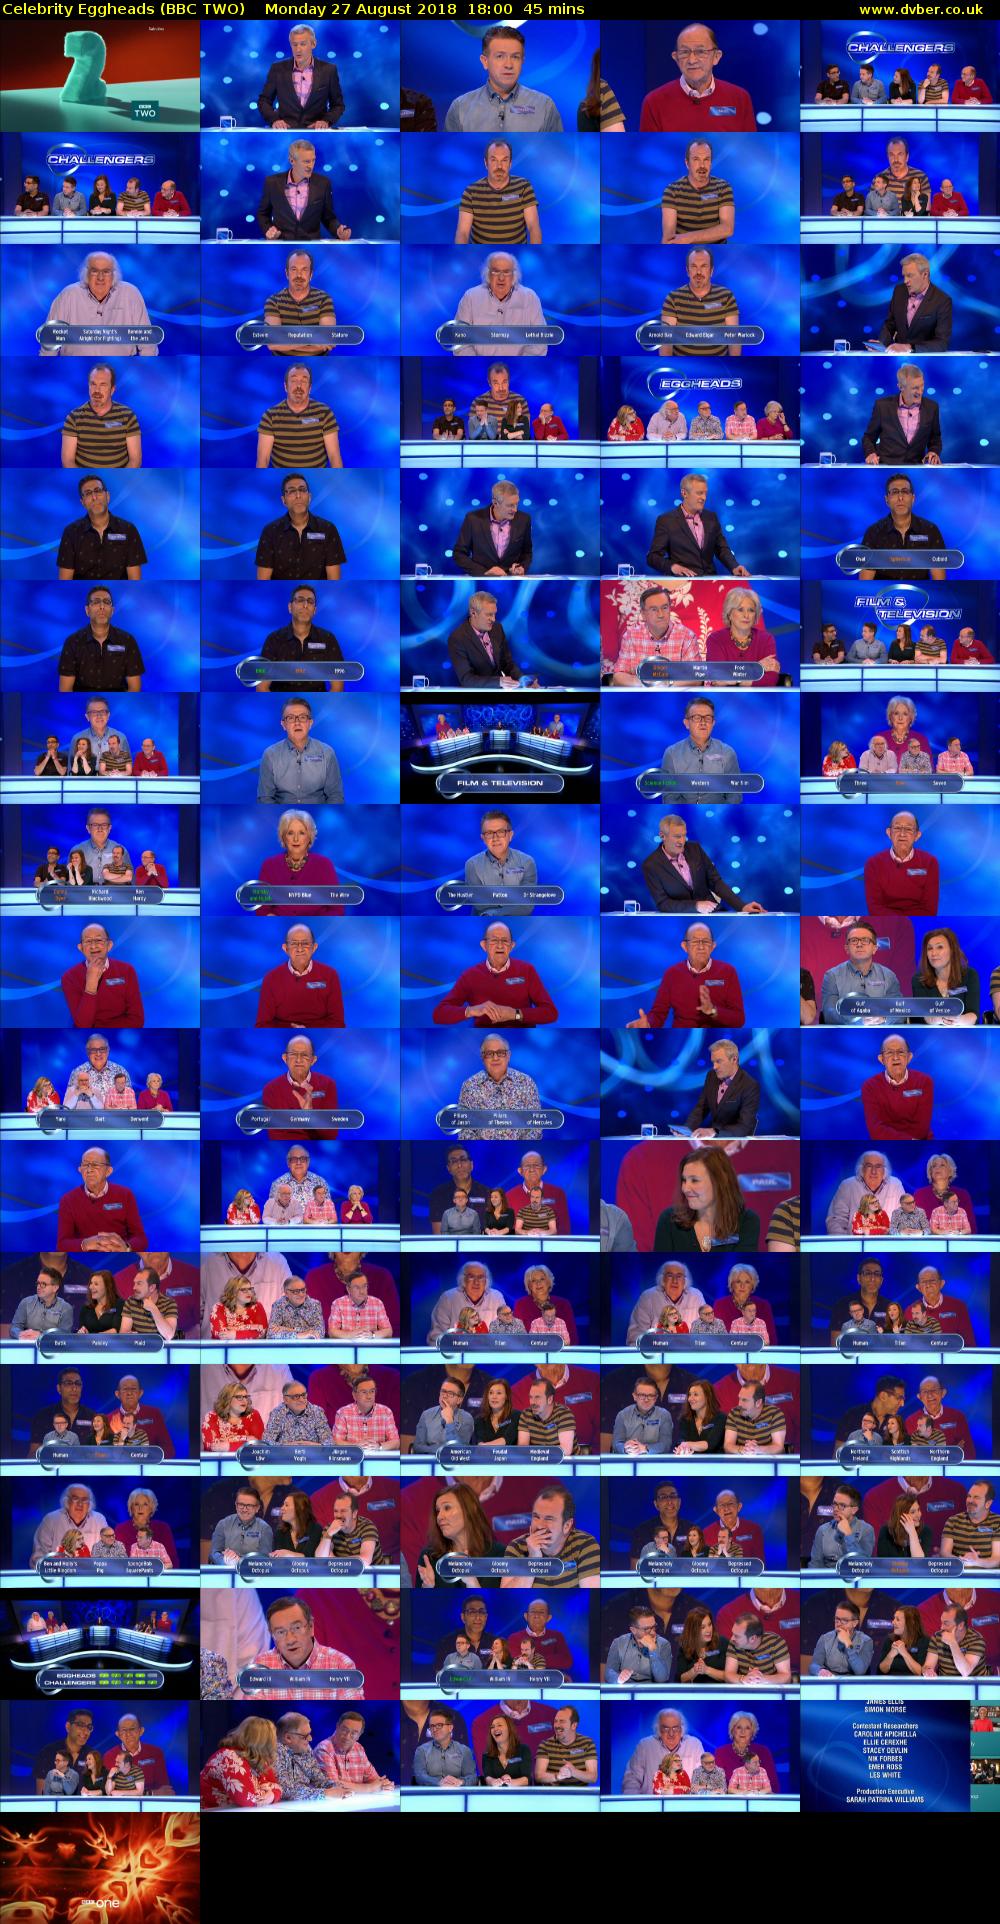 Celebrity Eggheads (BBC TWO) Monday 27 August 2018 18:00 - 18:45